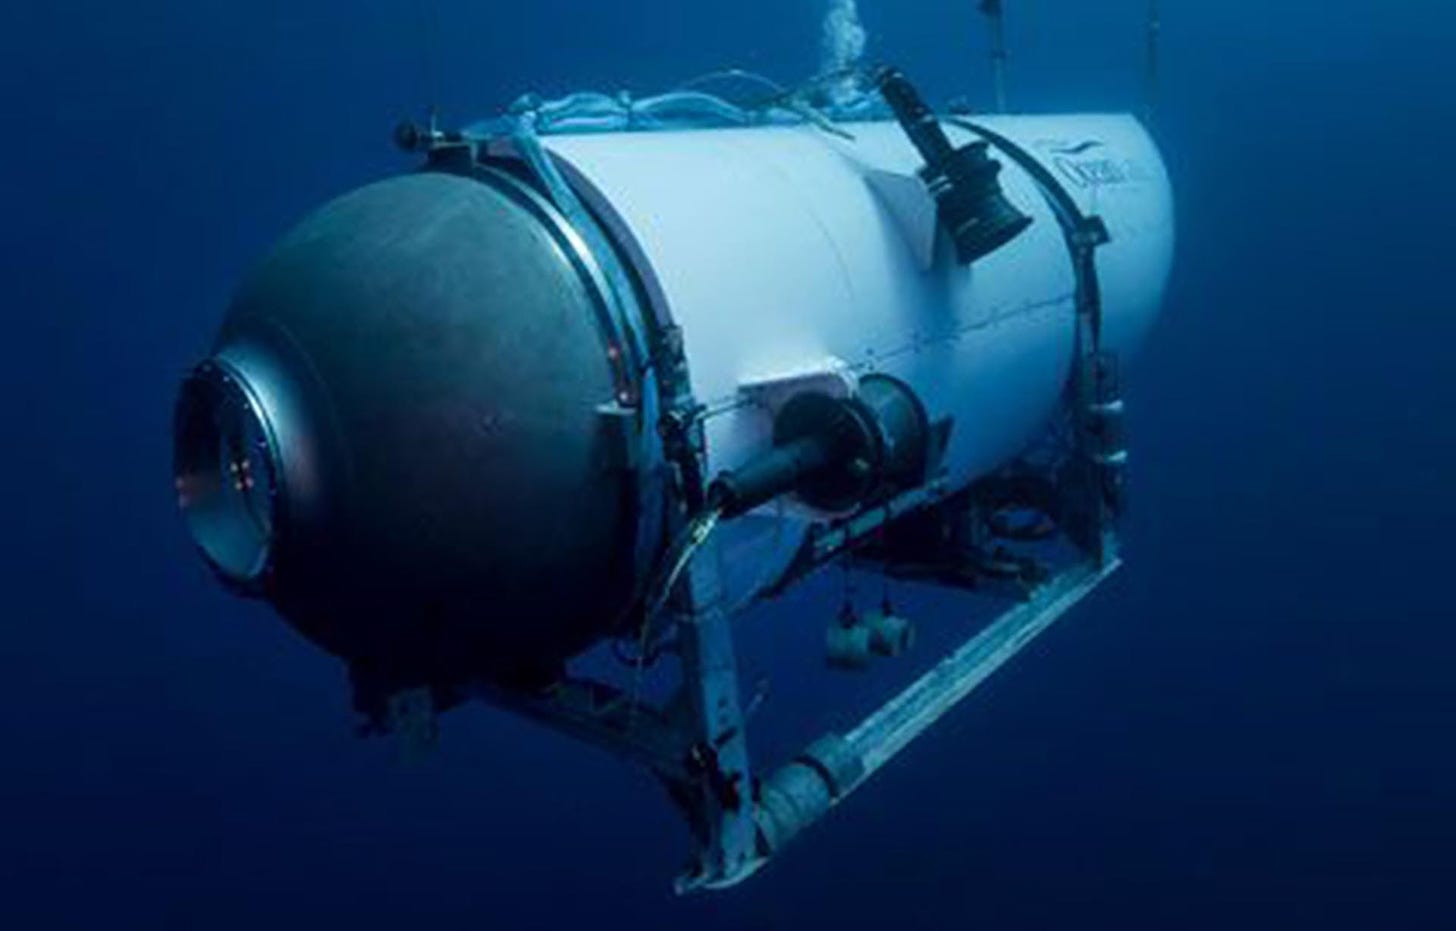 An image of the OceanGate Exepedition's Titan submersible